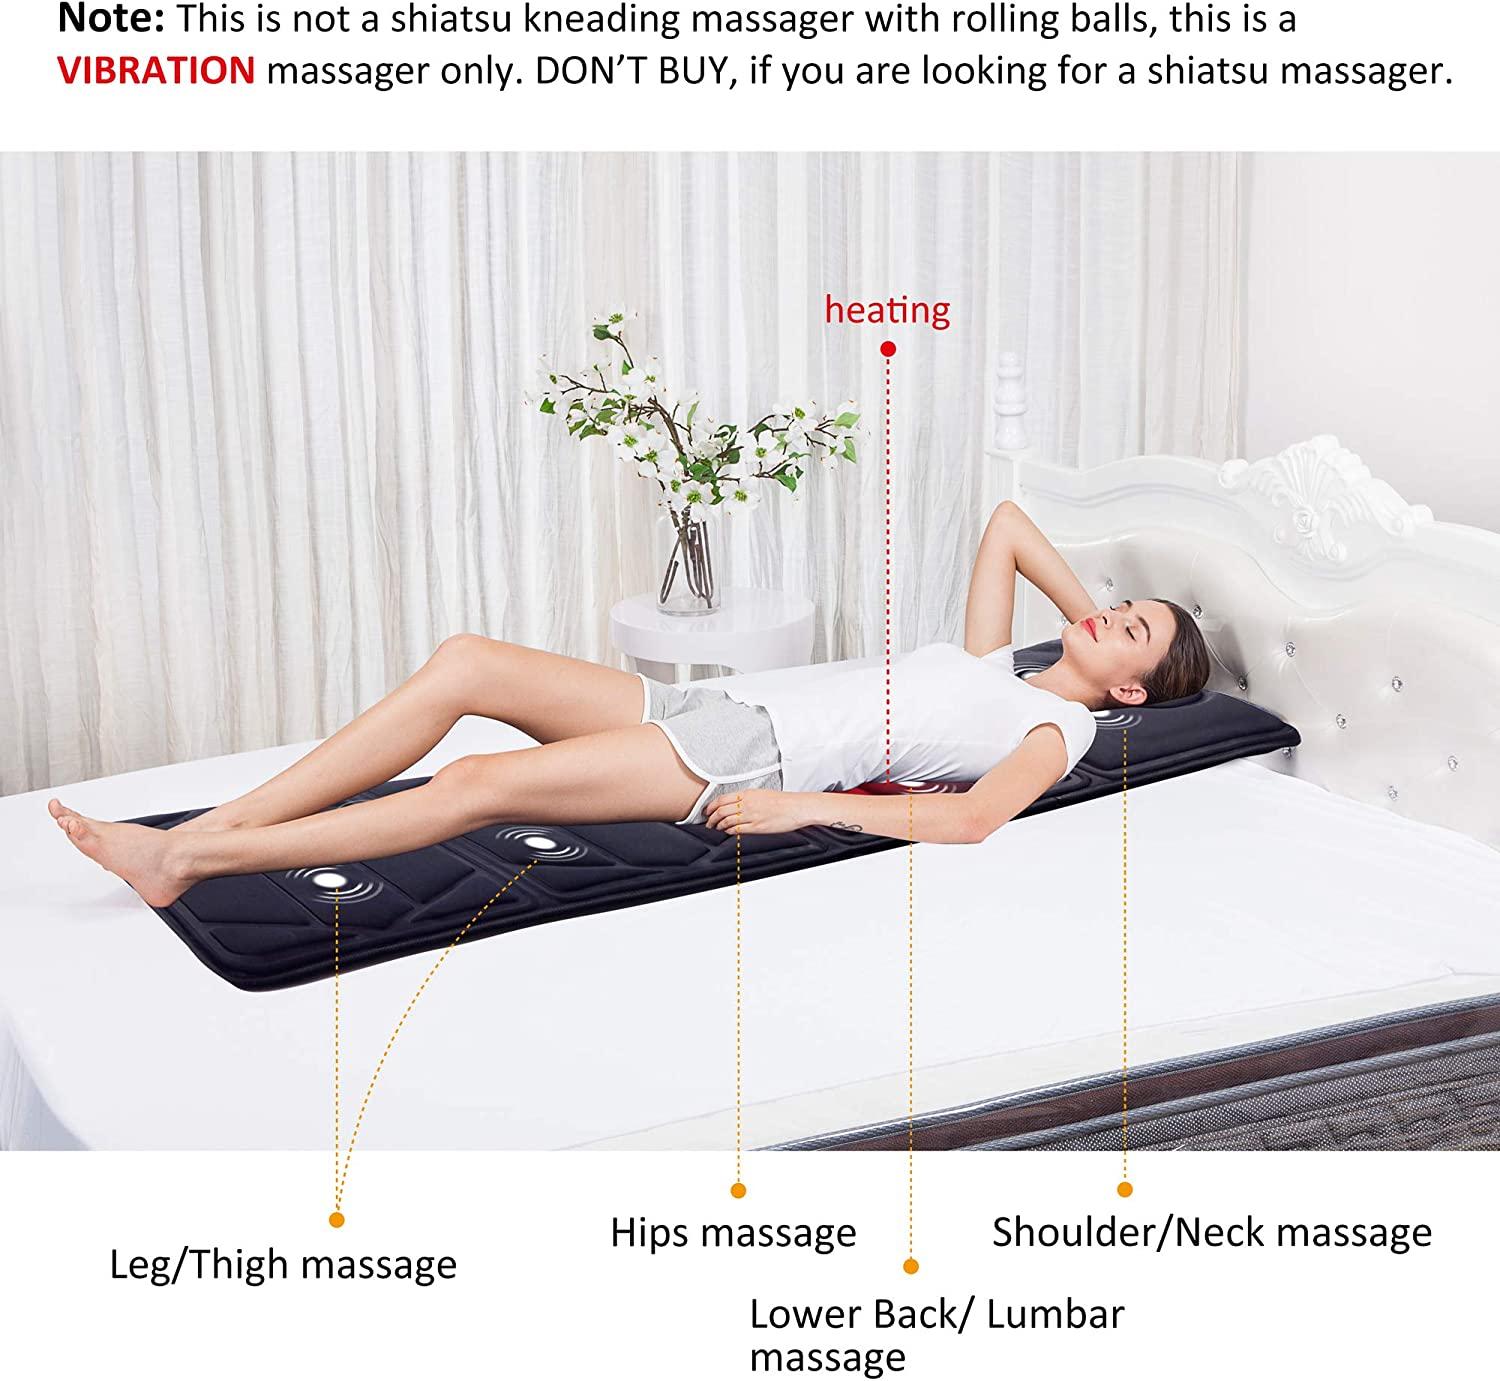 Snailax Massage Mat with Heat - 10 Motors Vibrating Massage Mattress Pad  with 2 Heating Pads for Back, Full Body Massager for Neck and Back,Lumbar  Calf Muscle Relaxation